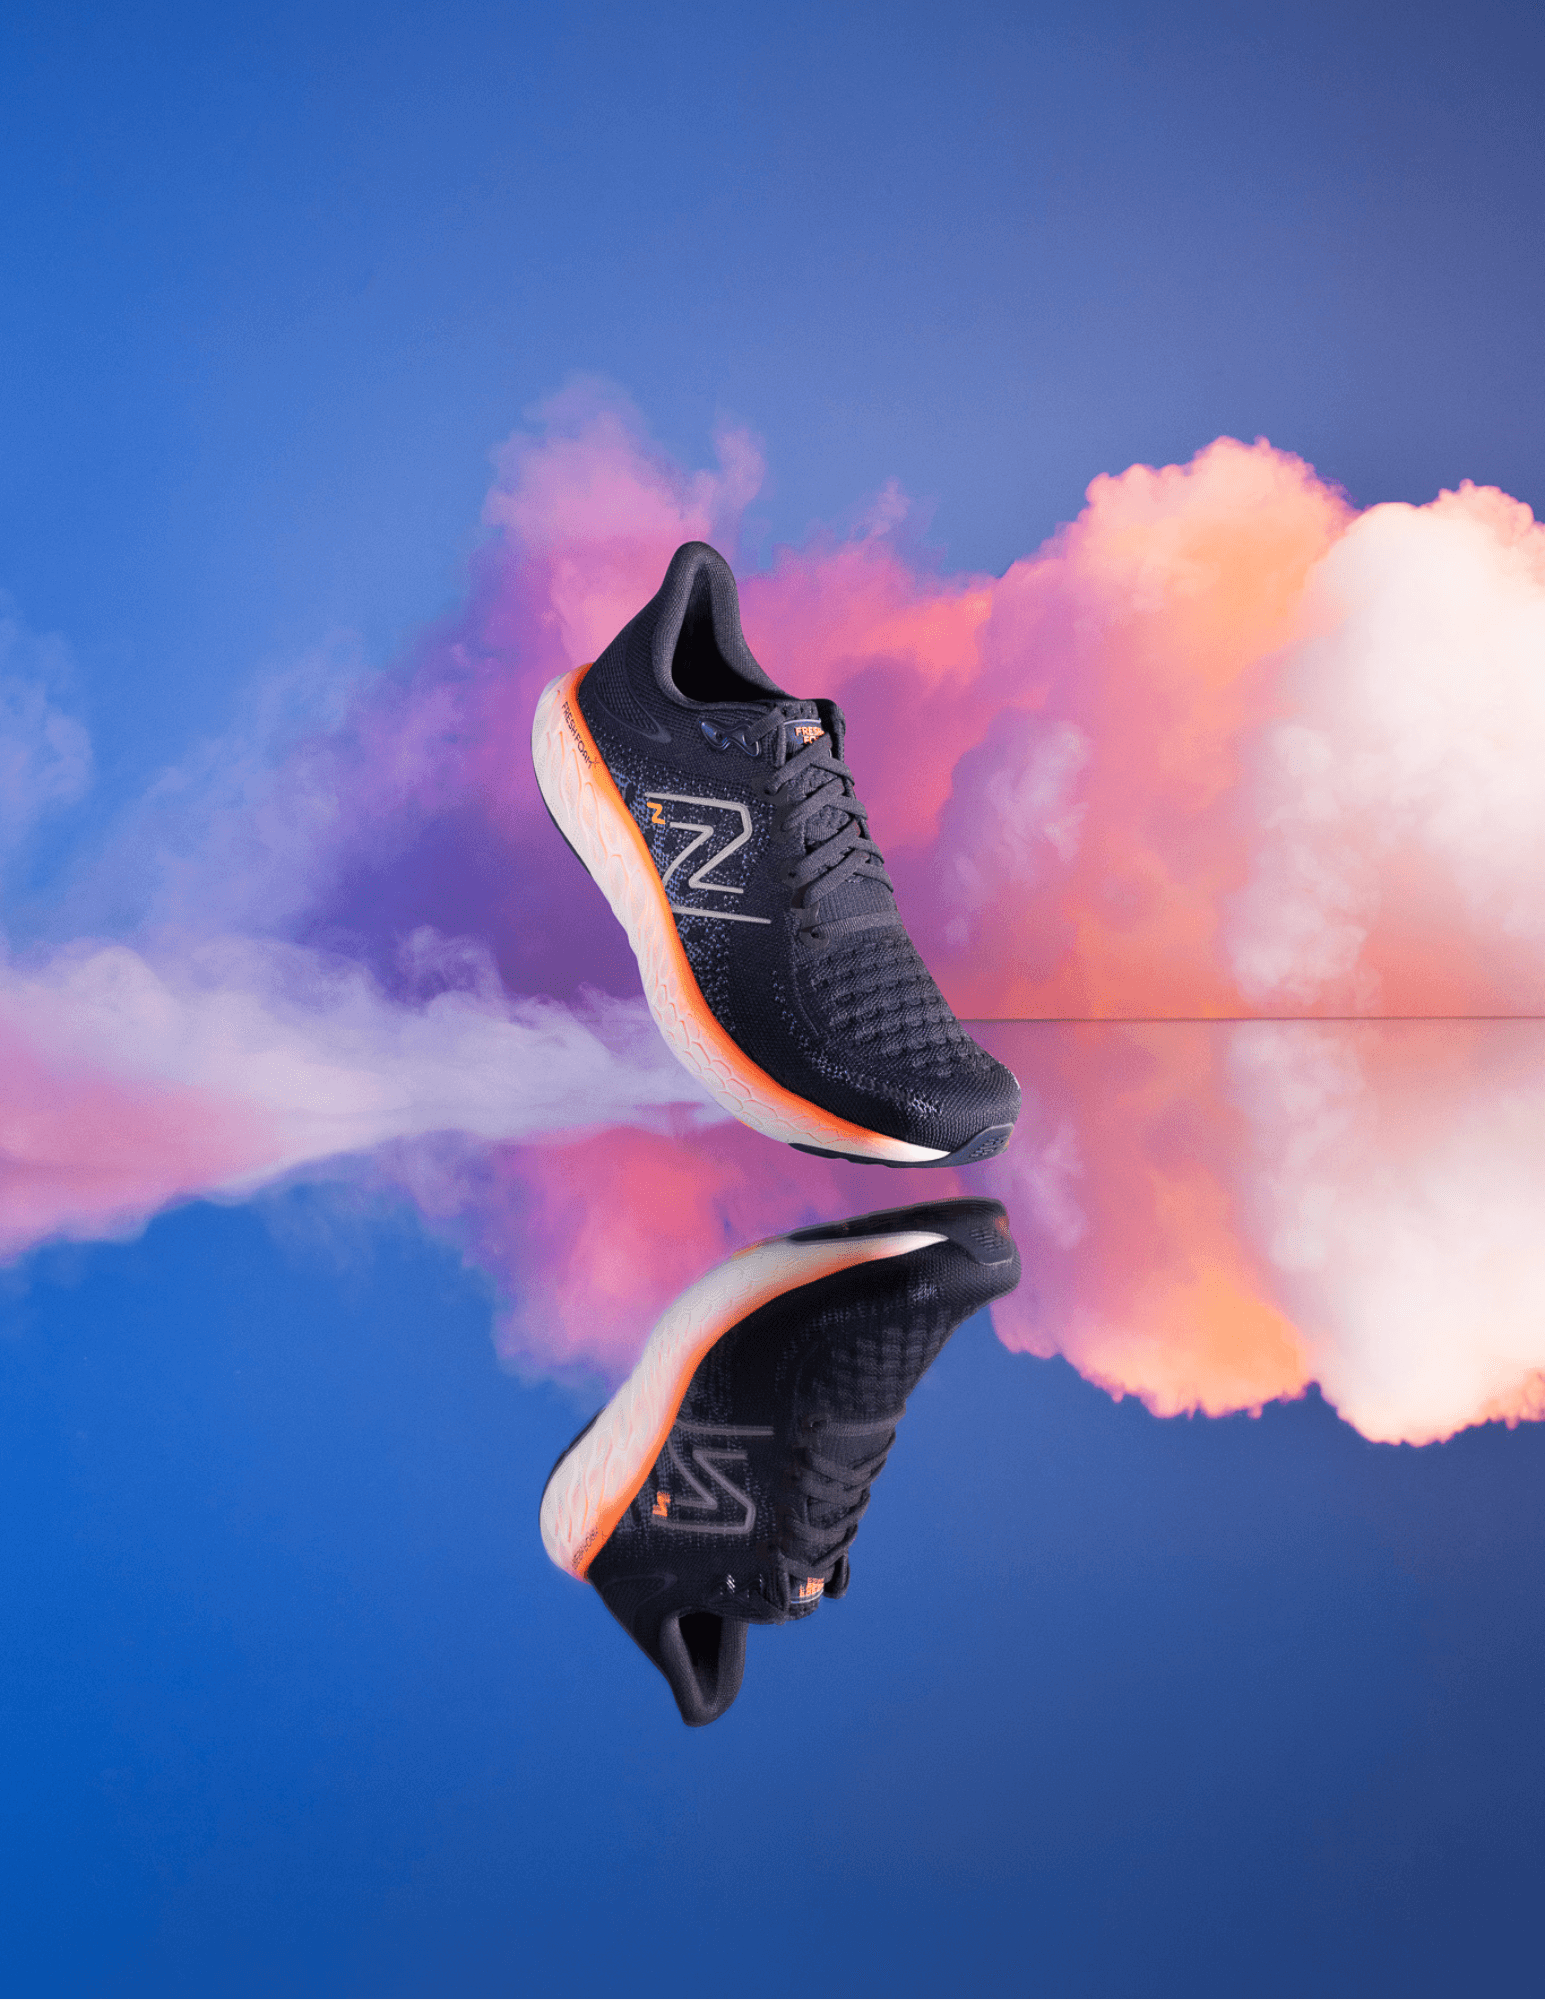 A New Balance shoe floats and reflects on water.